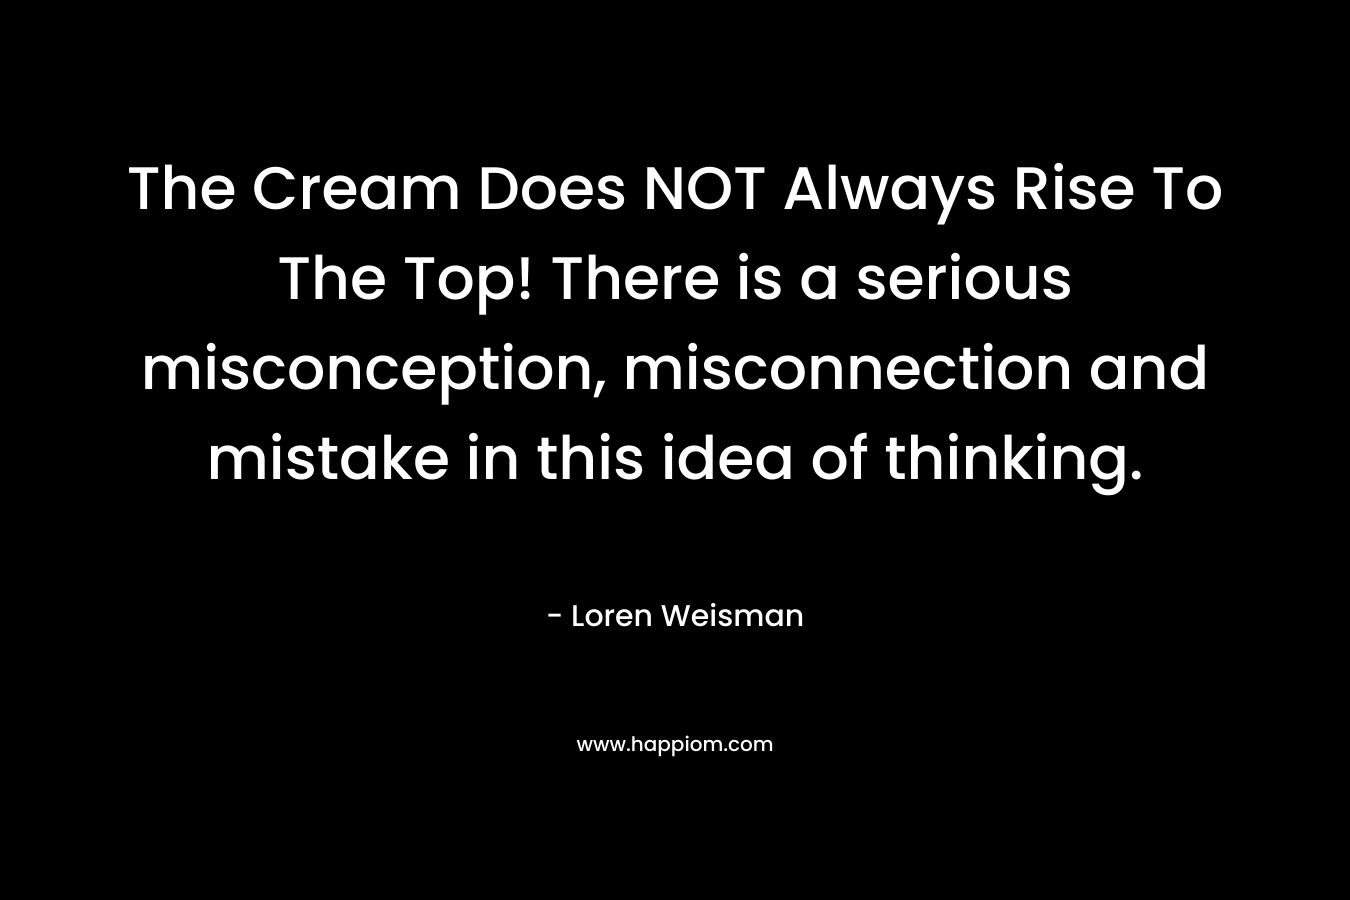 The Cream Does NOT Always Rise To The Top! There is a serious misconception, misconnection and mistake in this idea of thinking. – Loren Weisman